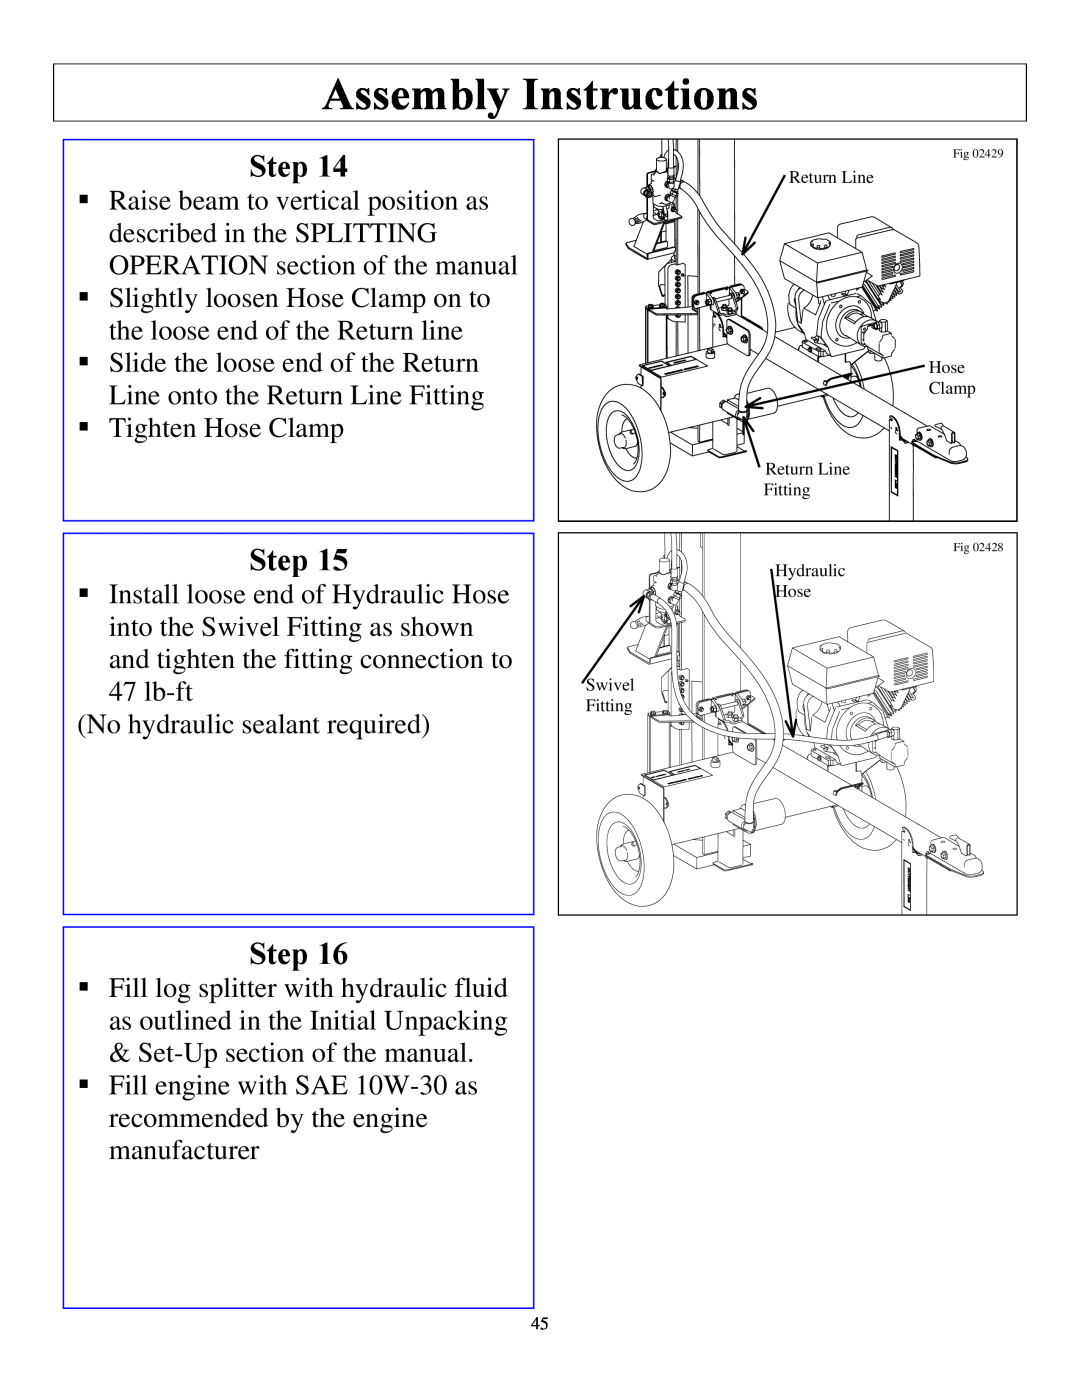 North Star M1108D owner manual Assembly Instructions, Step, No hydraulic sealant required 